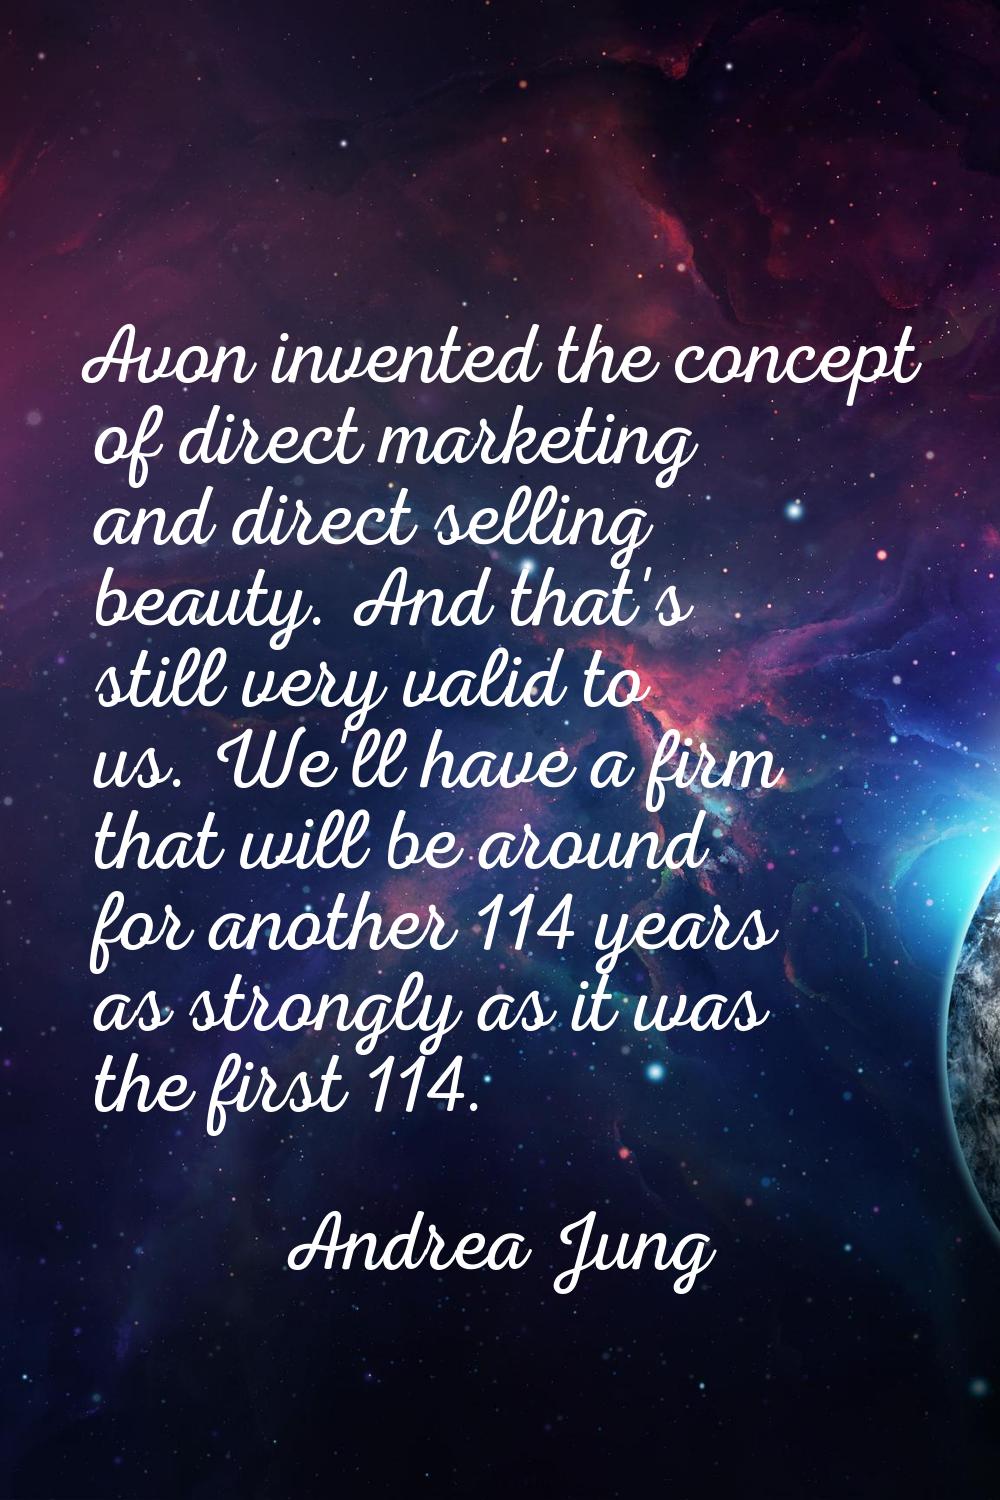 Avon invented the concept of direct marketing and direct selling beauty. And that's still very vali